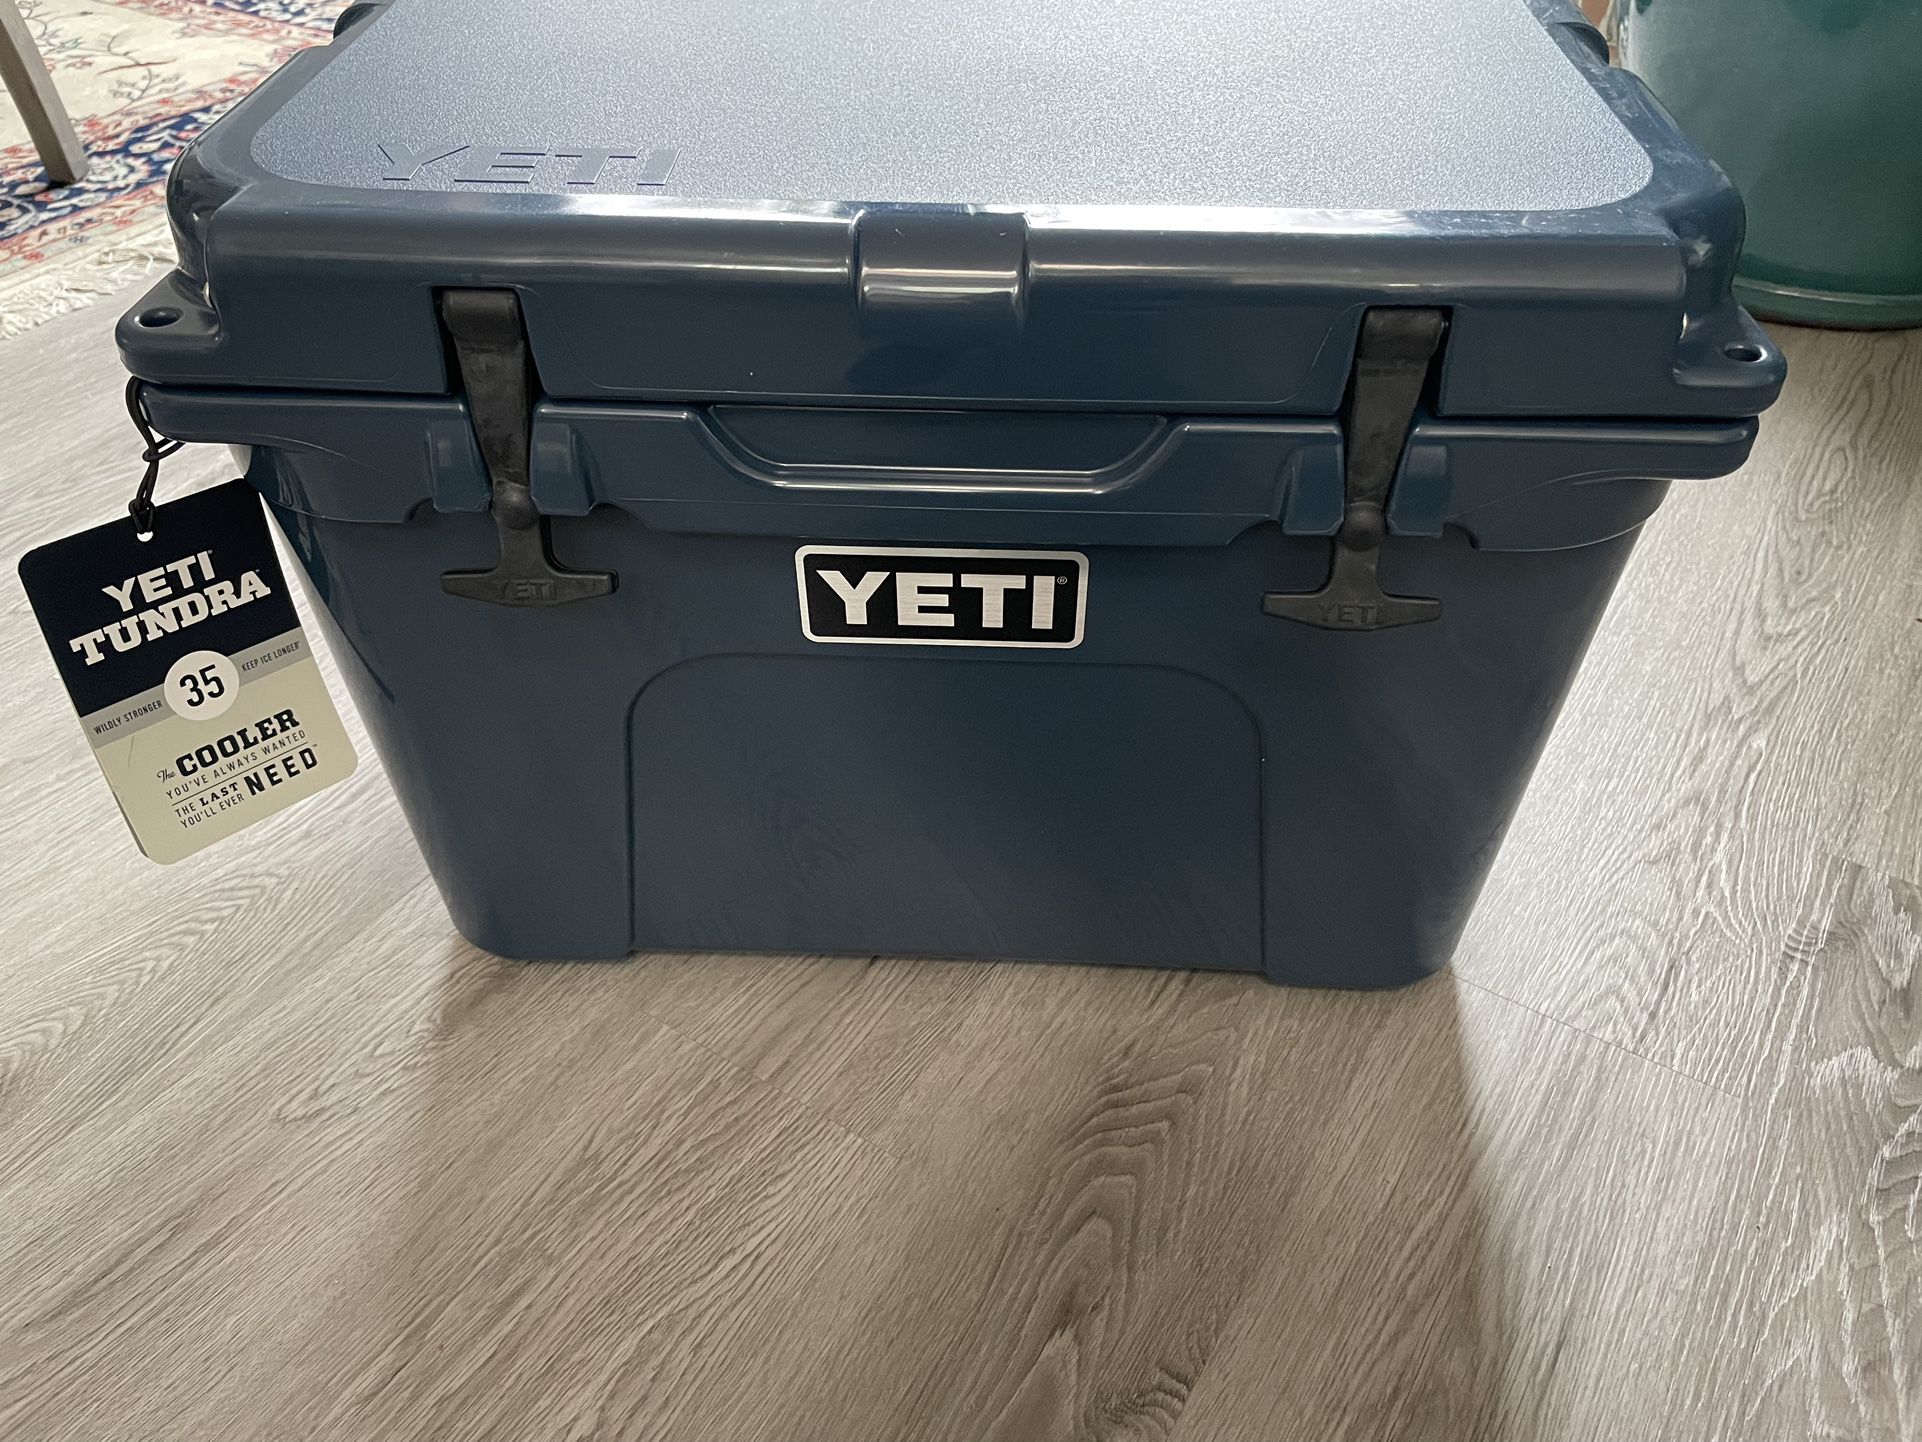 Brand New Never Been Used Navy Blue Yeti Tundra Cooler - 